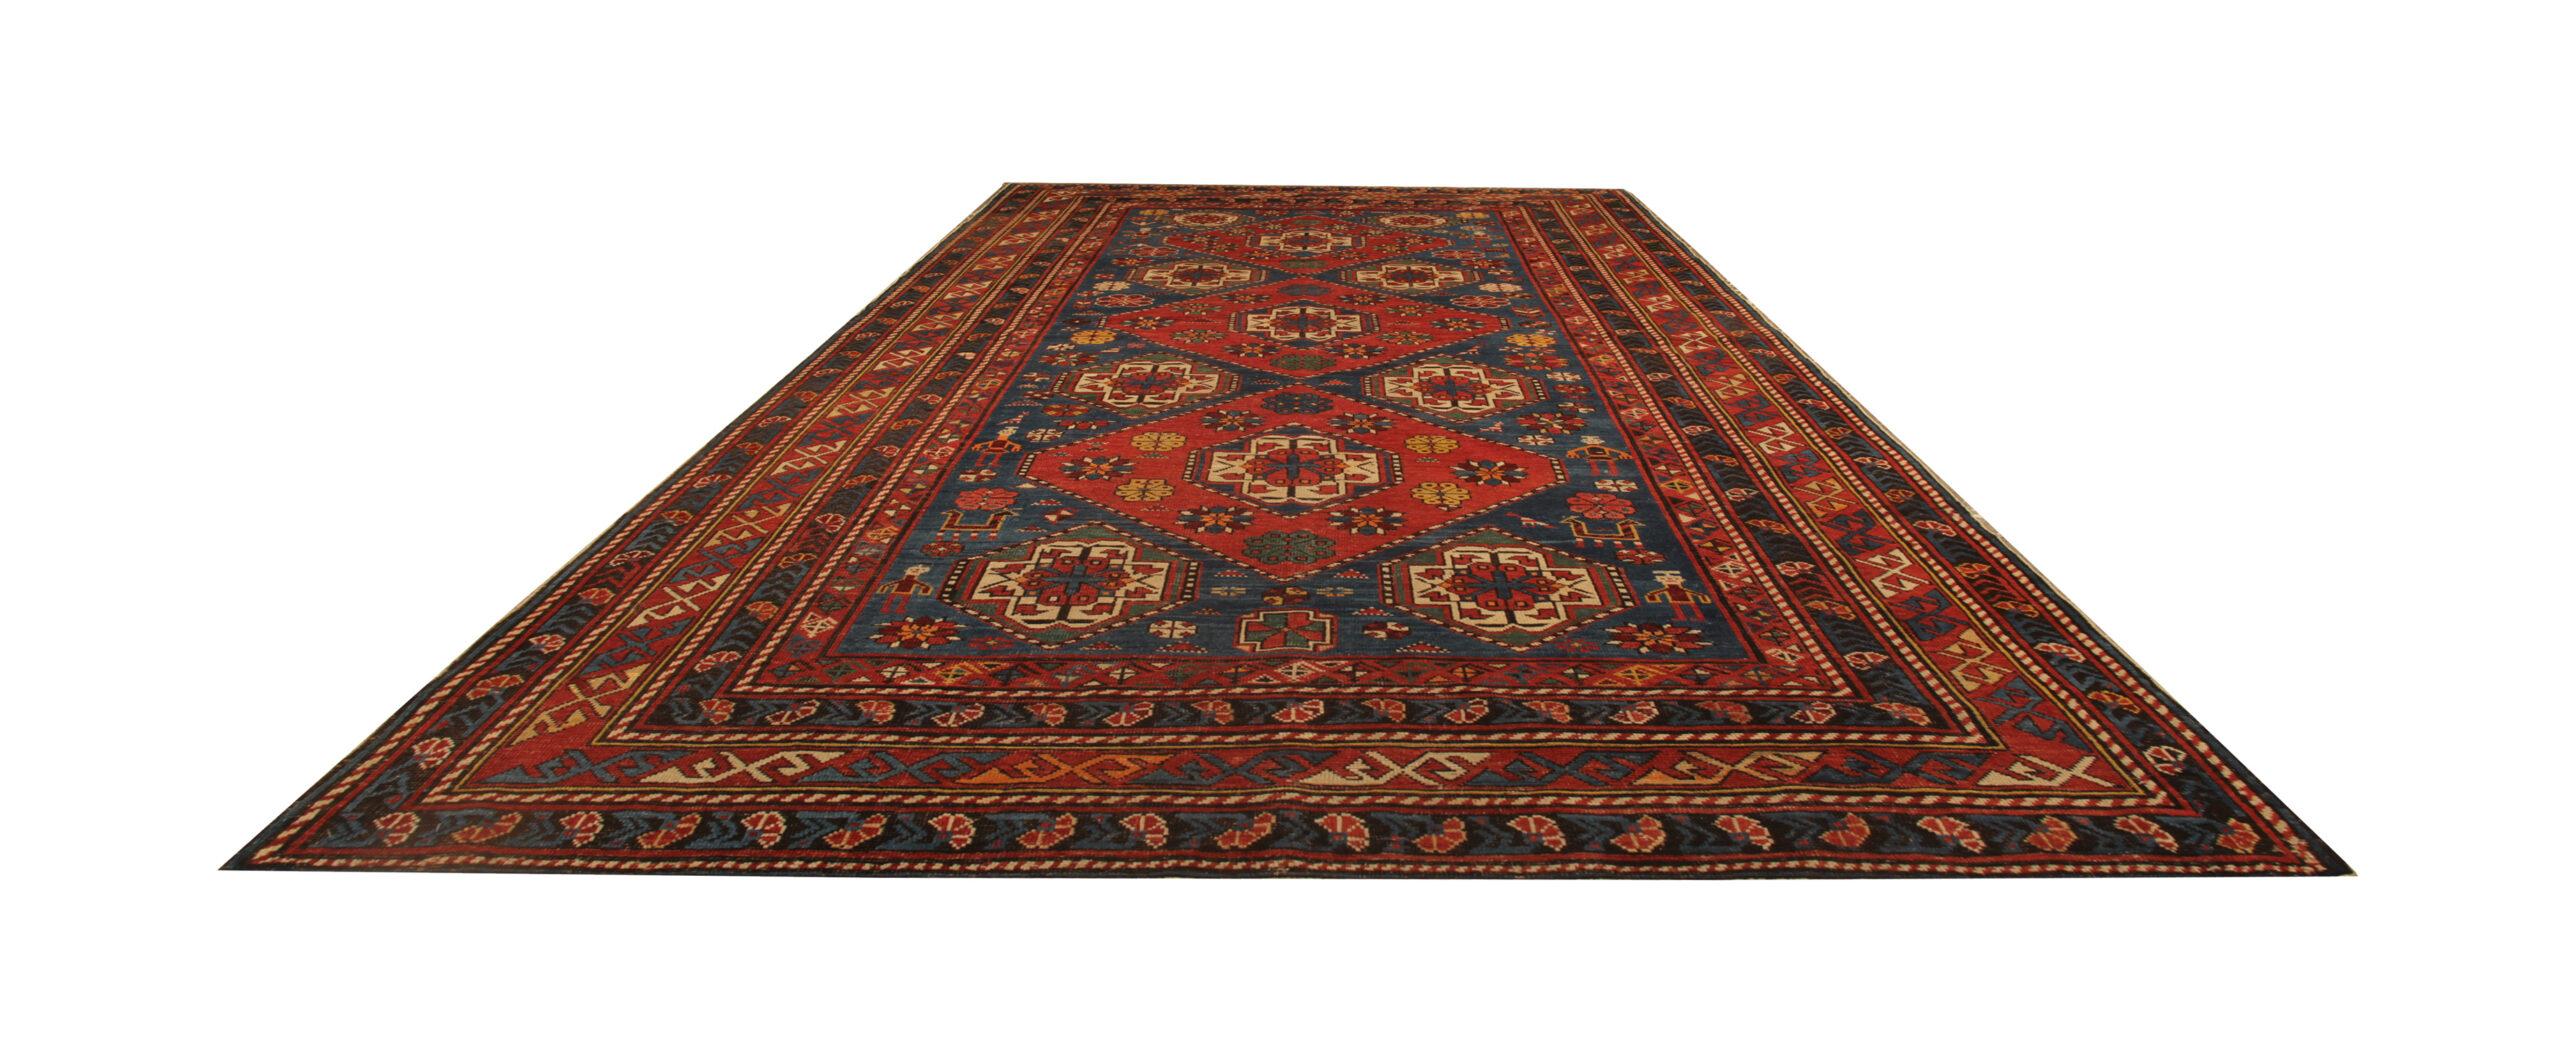 Vegetable Dyed Rare Antique Rug Caucasian Oriental Rug Handmade Carpet from Shirvan Area CHR56 For Sale